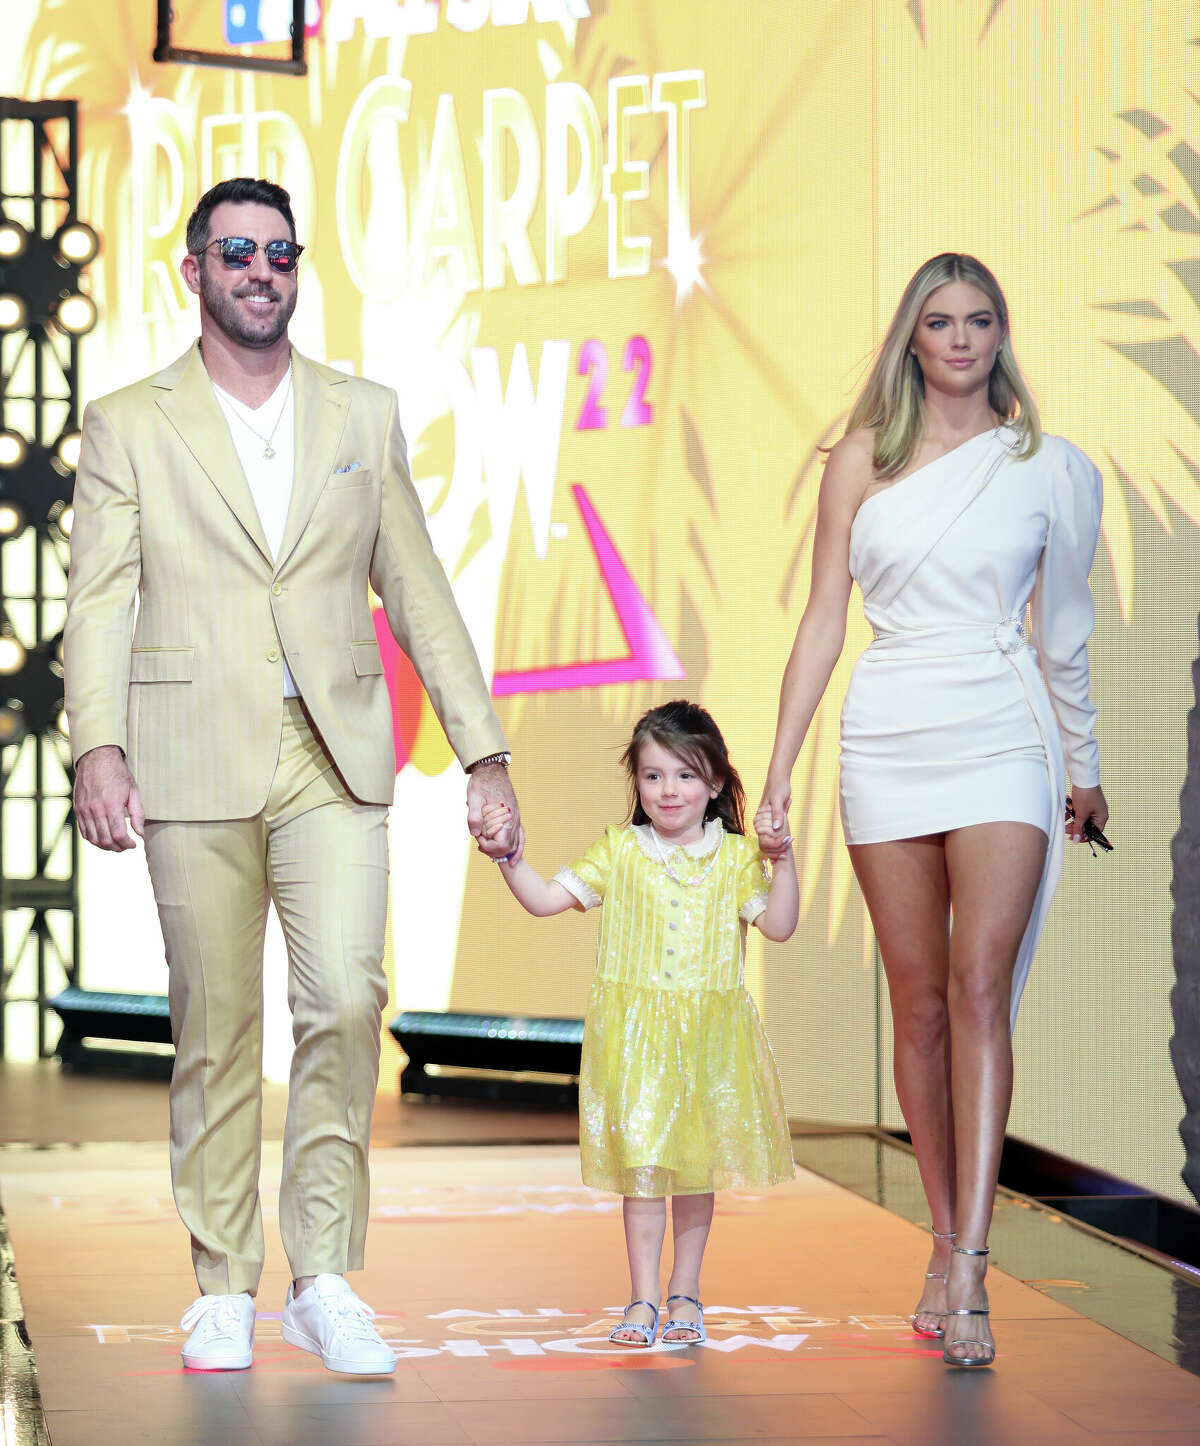 Astros pitcher Justin Verlander, his wife Kate Upton and their daughter Genevieve arrive at The 2022 MLB All-Star Game Red Carpet Show at XBOX Plaza on July 19, 2022 in Los Angeles, California.